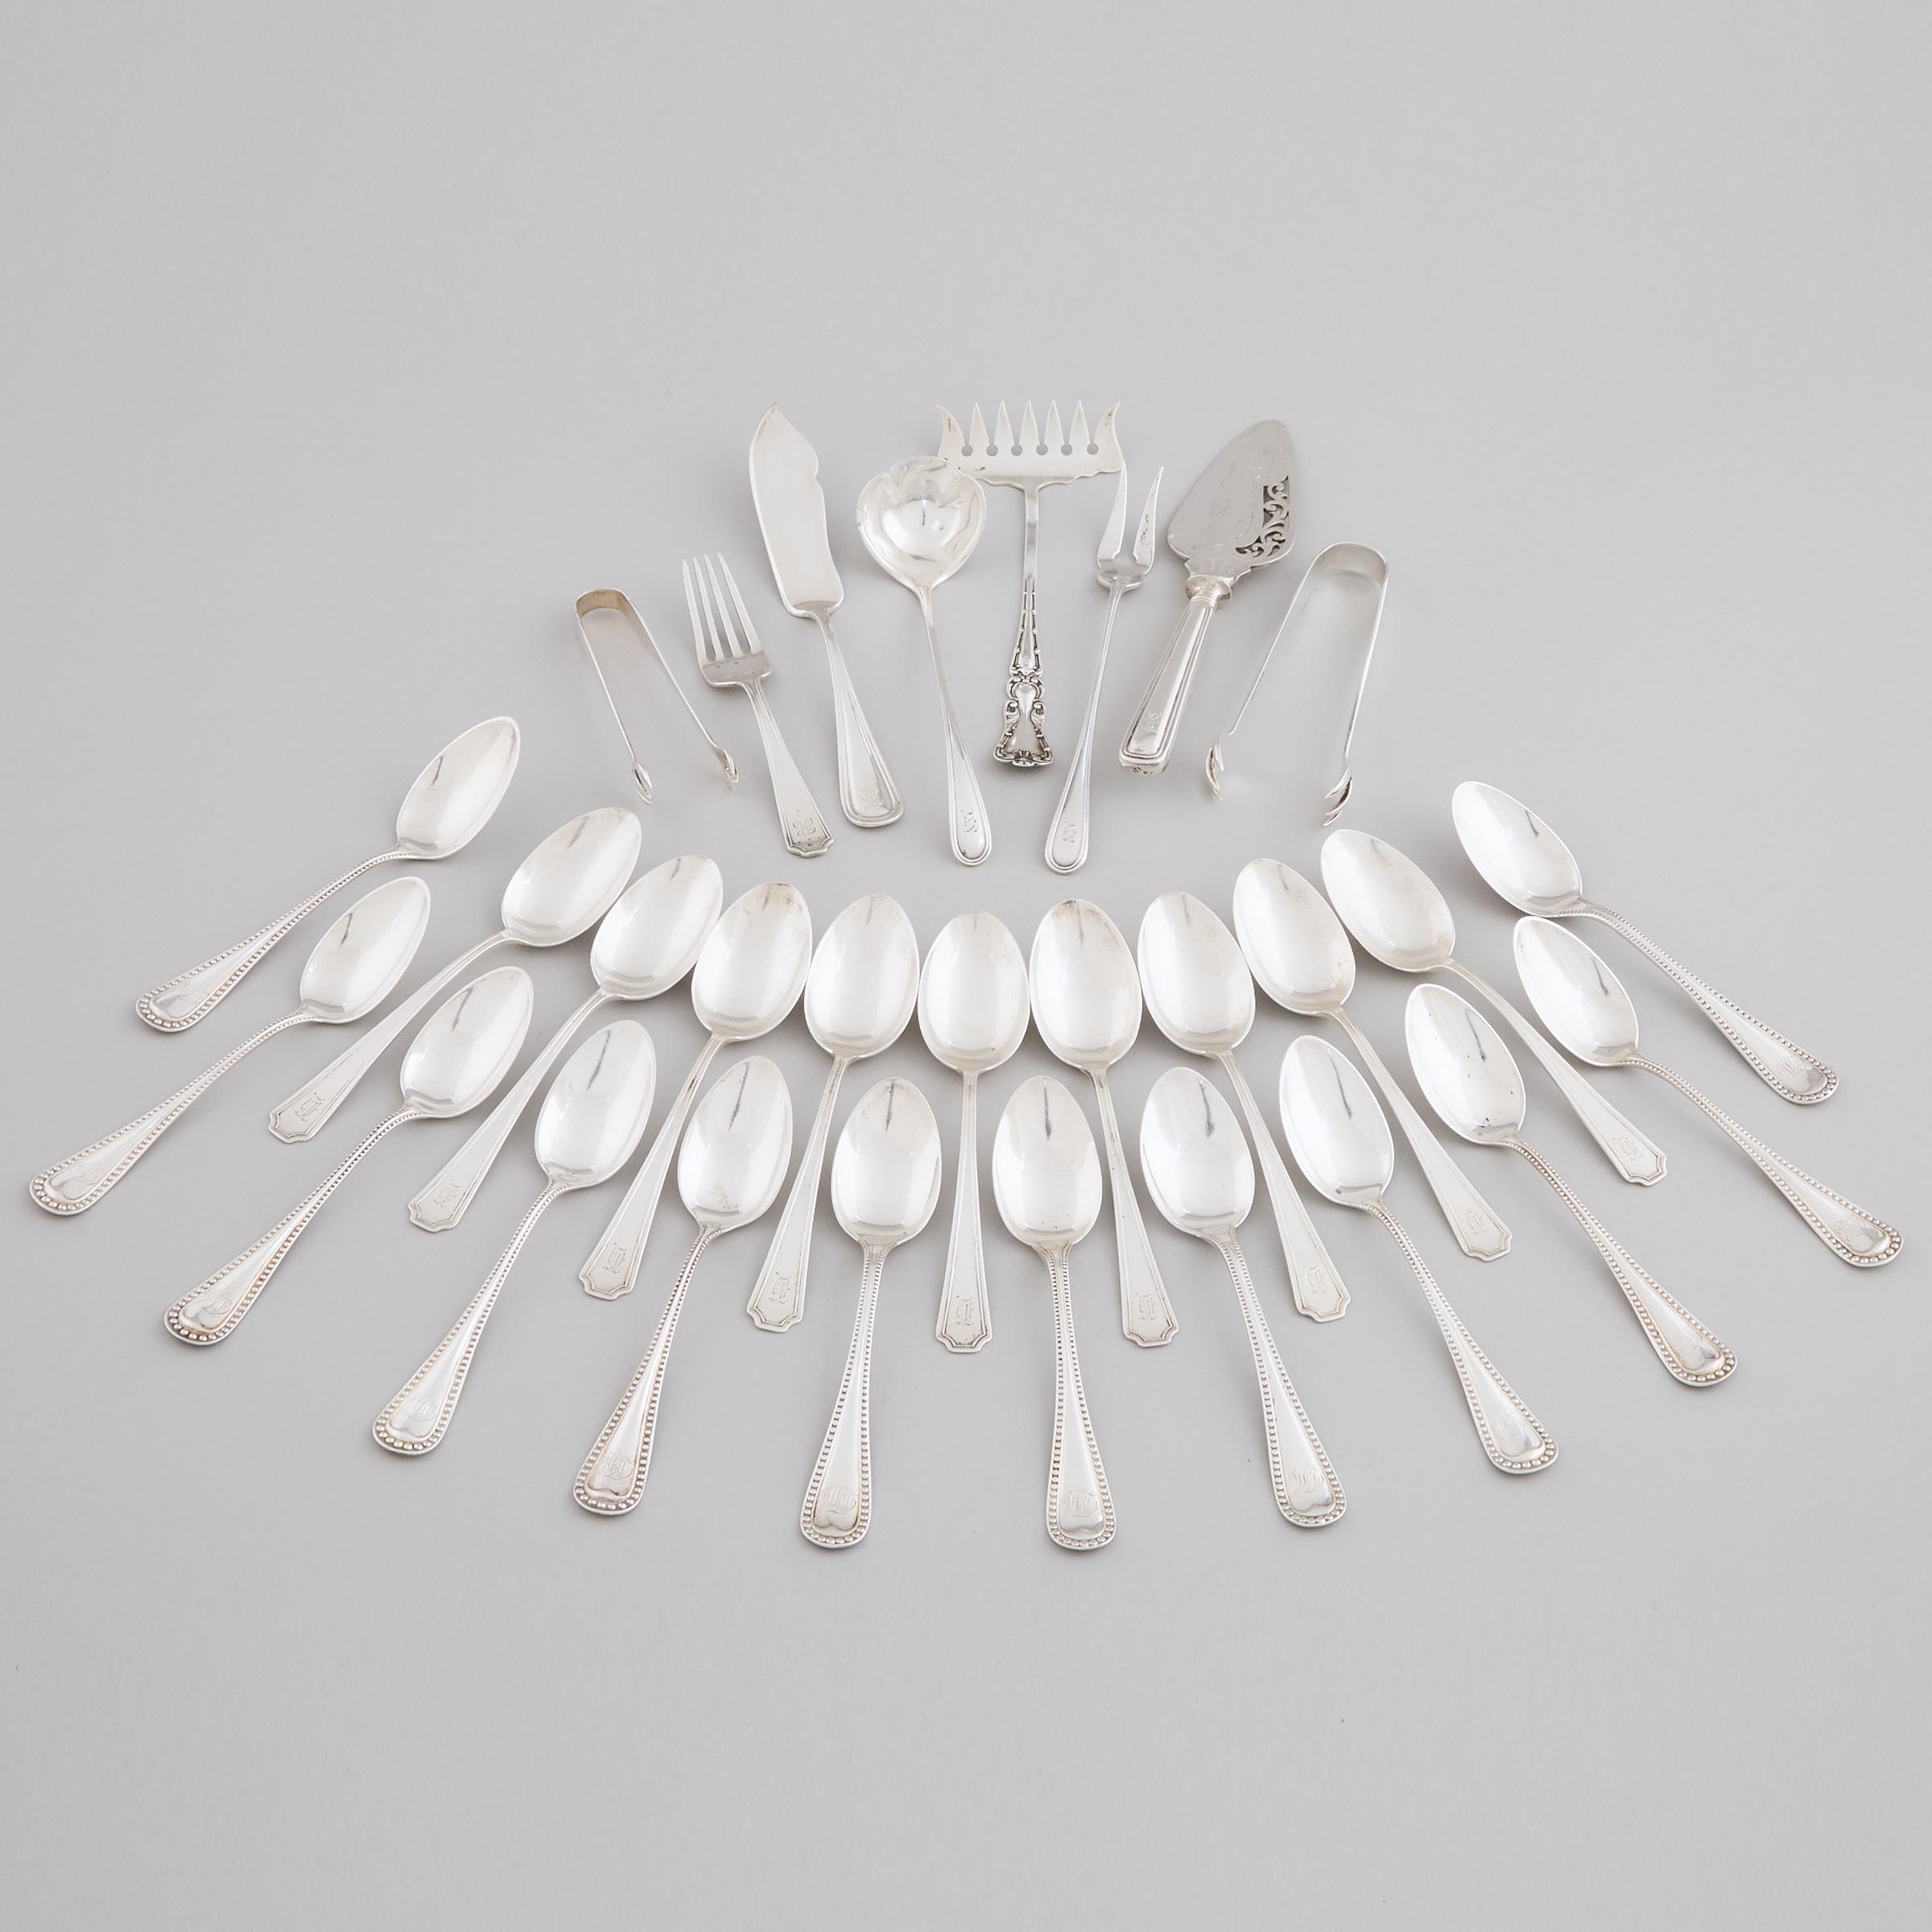 Group of Mainly Canadian Silver Flatware, 20th century